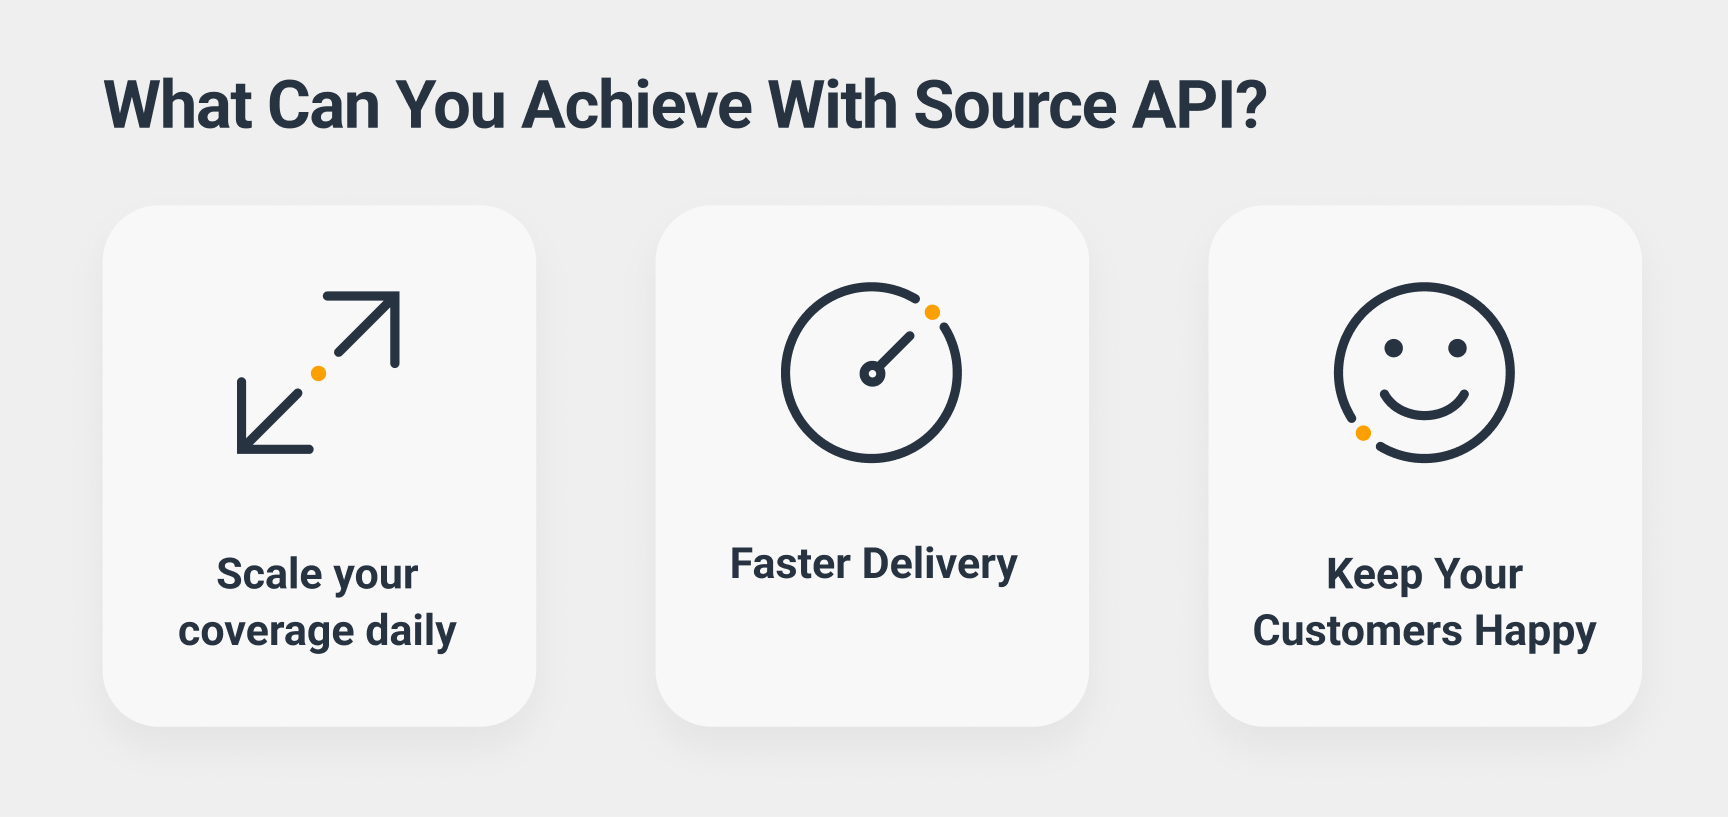 What can you achieve with source API?